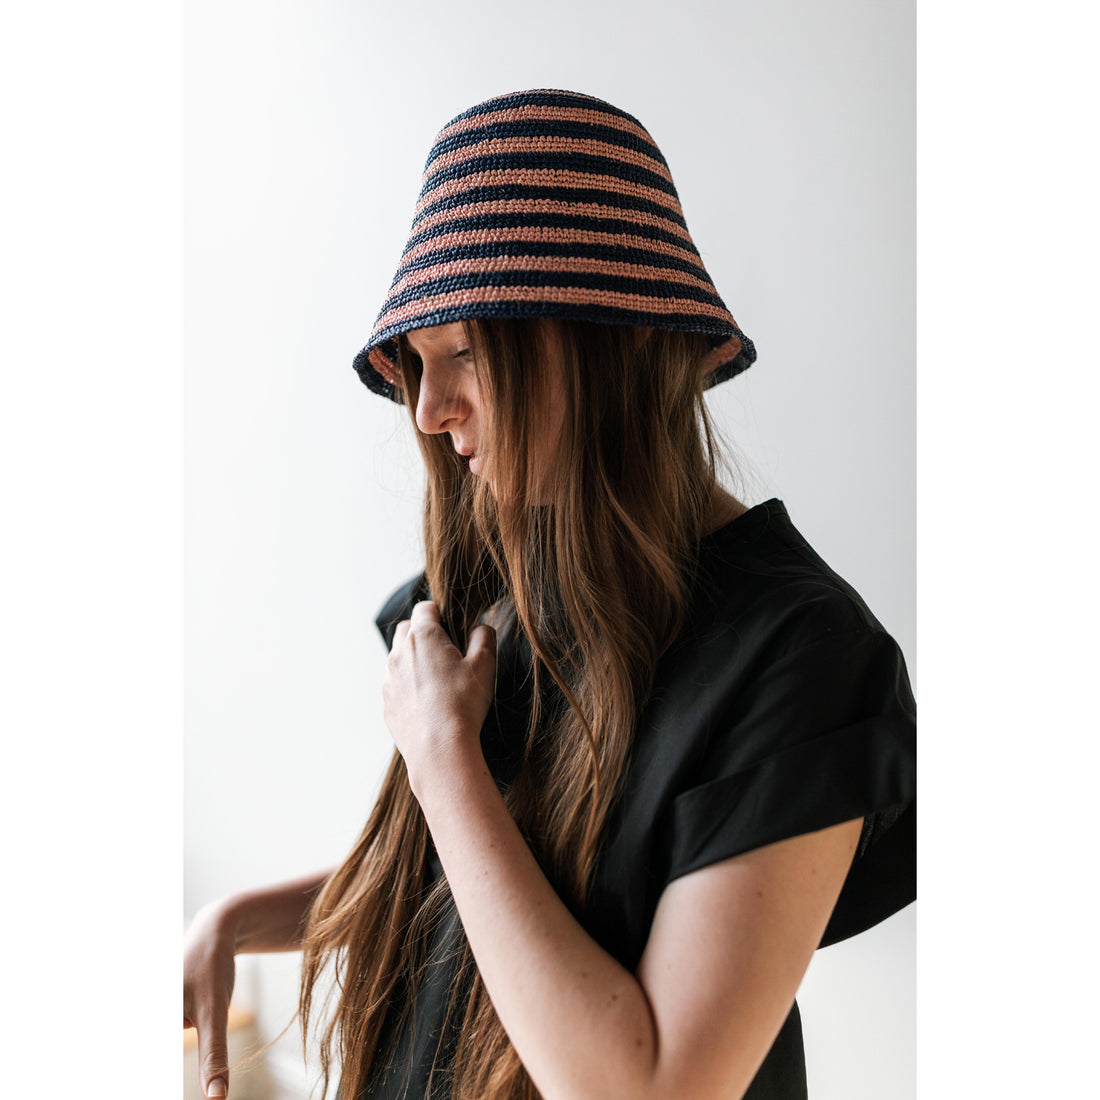 Clyde Opia Hat in Brown/Cream Stripe